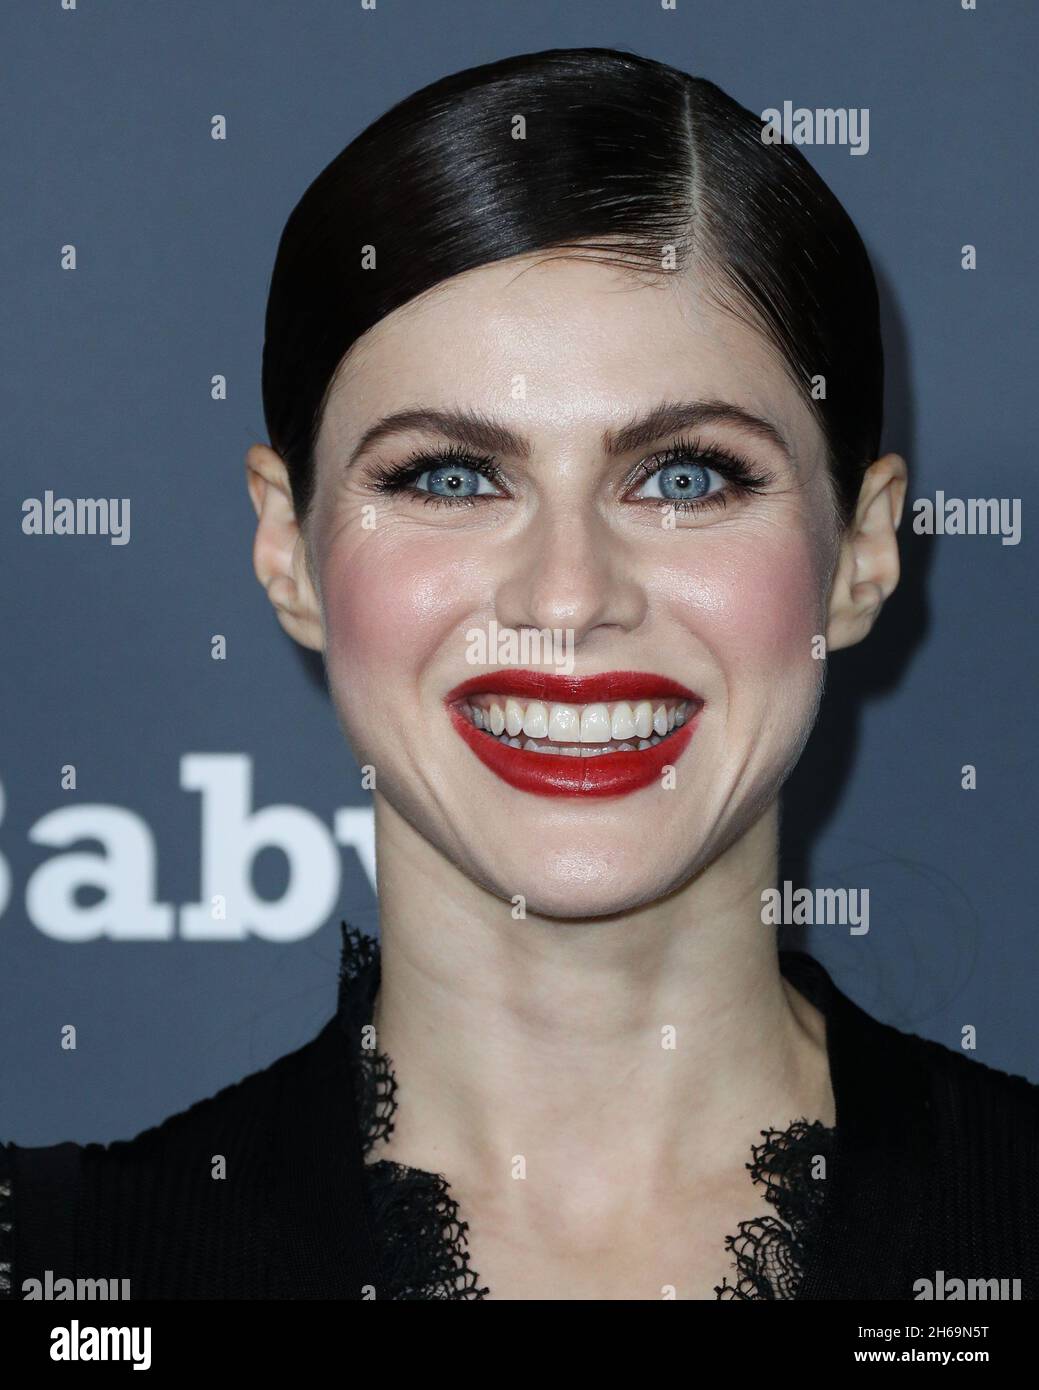 west-hollywood-los-angeles-california-usa-november-13-actress-alexandra-daddario-arrives-at-the-baby2baby-10-year-gala-2021-held-at-the-pacific-design-center-on-november-13-2021-in-west-hollywood-los-angeles-california-united-states-photo-by-xavier-collinimage-press-agencysipa-usa-2H69N5T.jpg